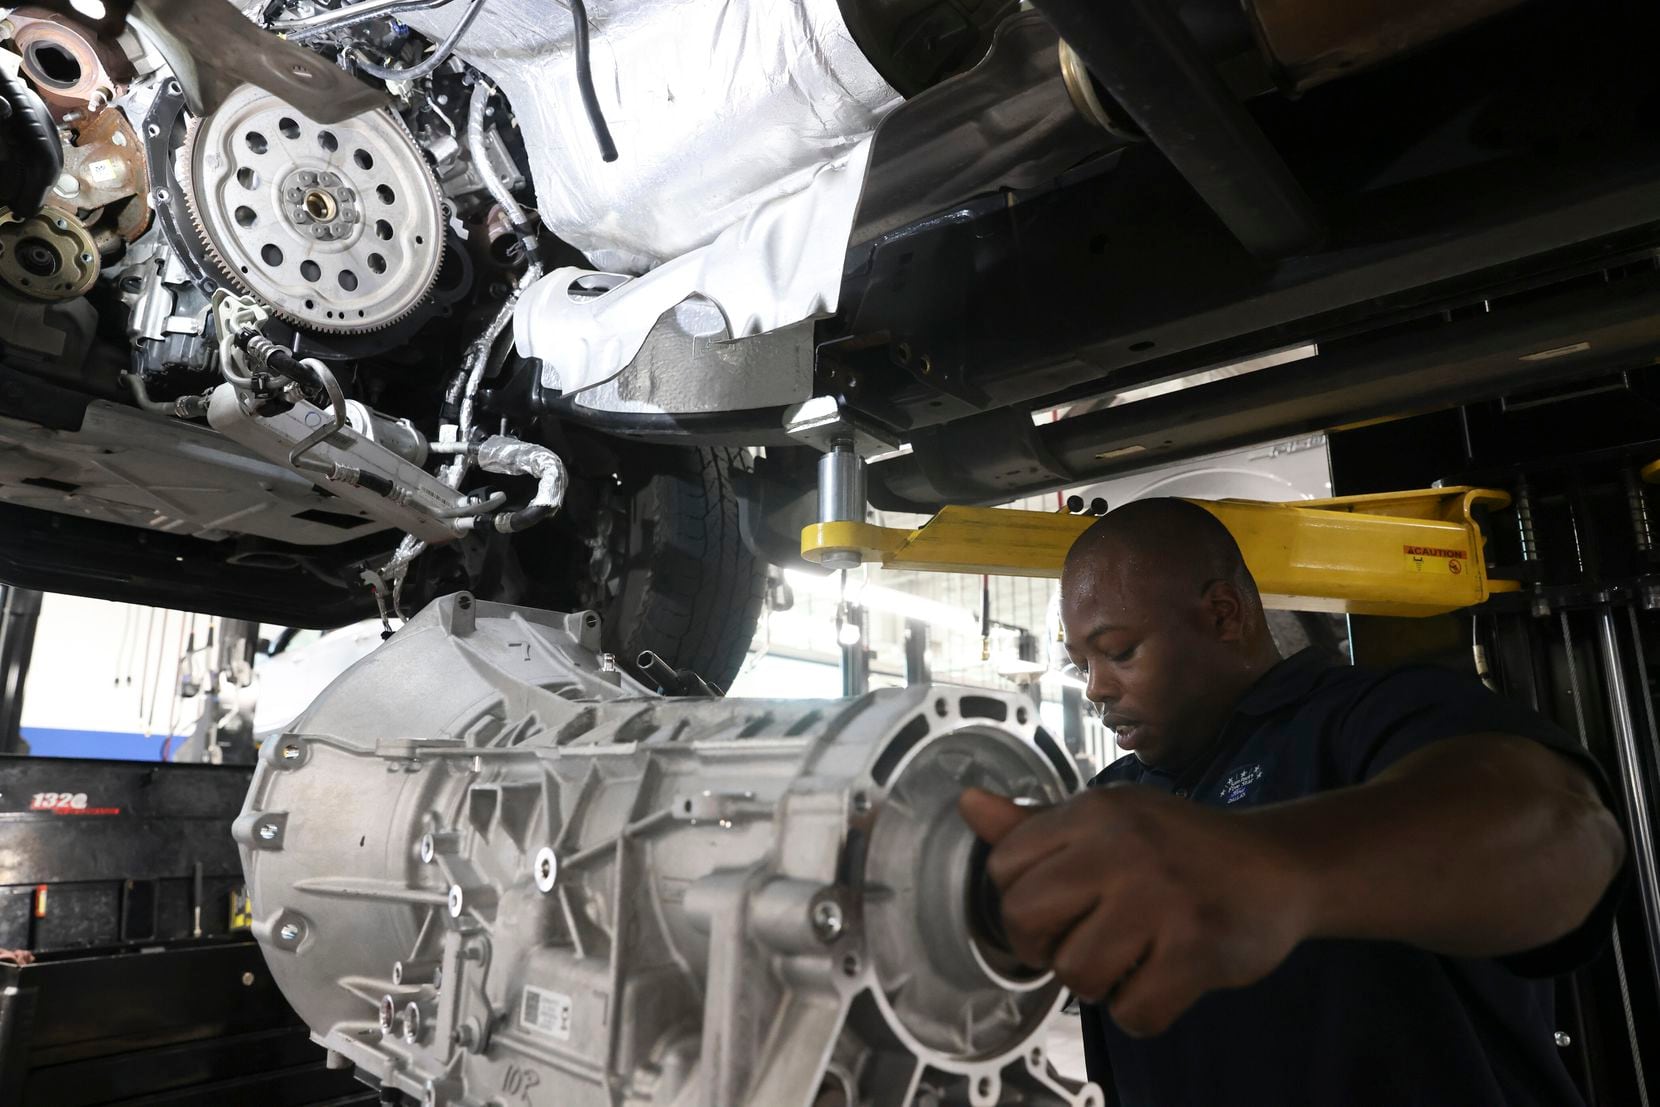 Car repair delays have dealerships, customers equally frustrated